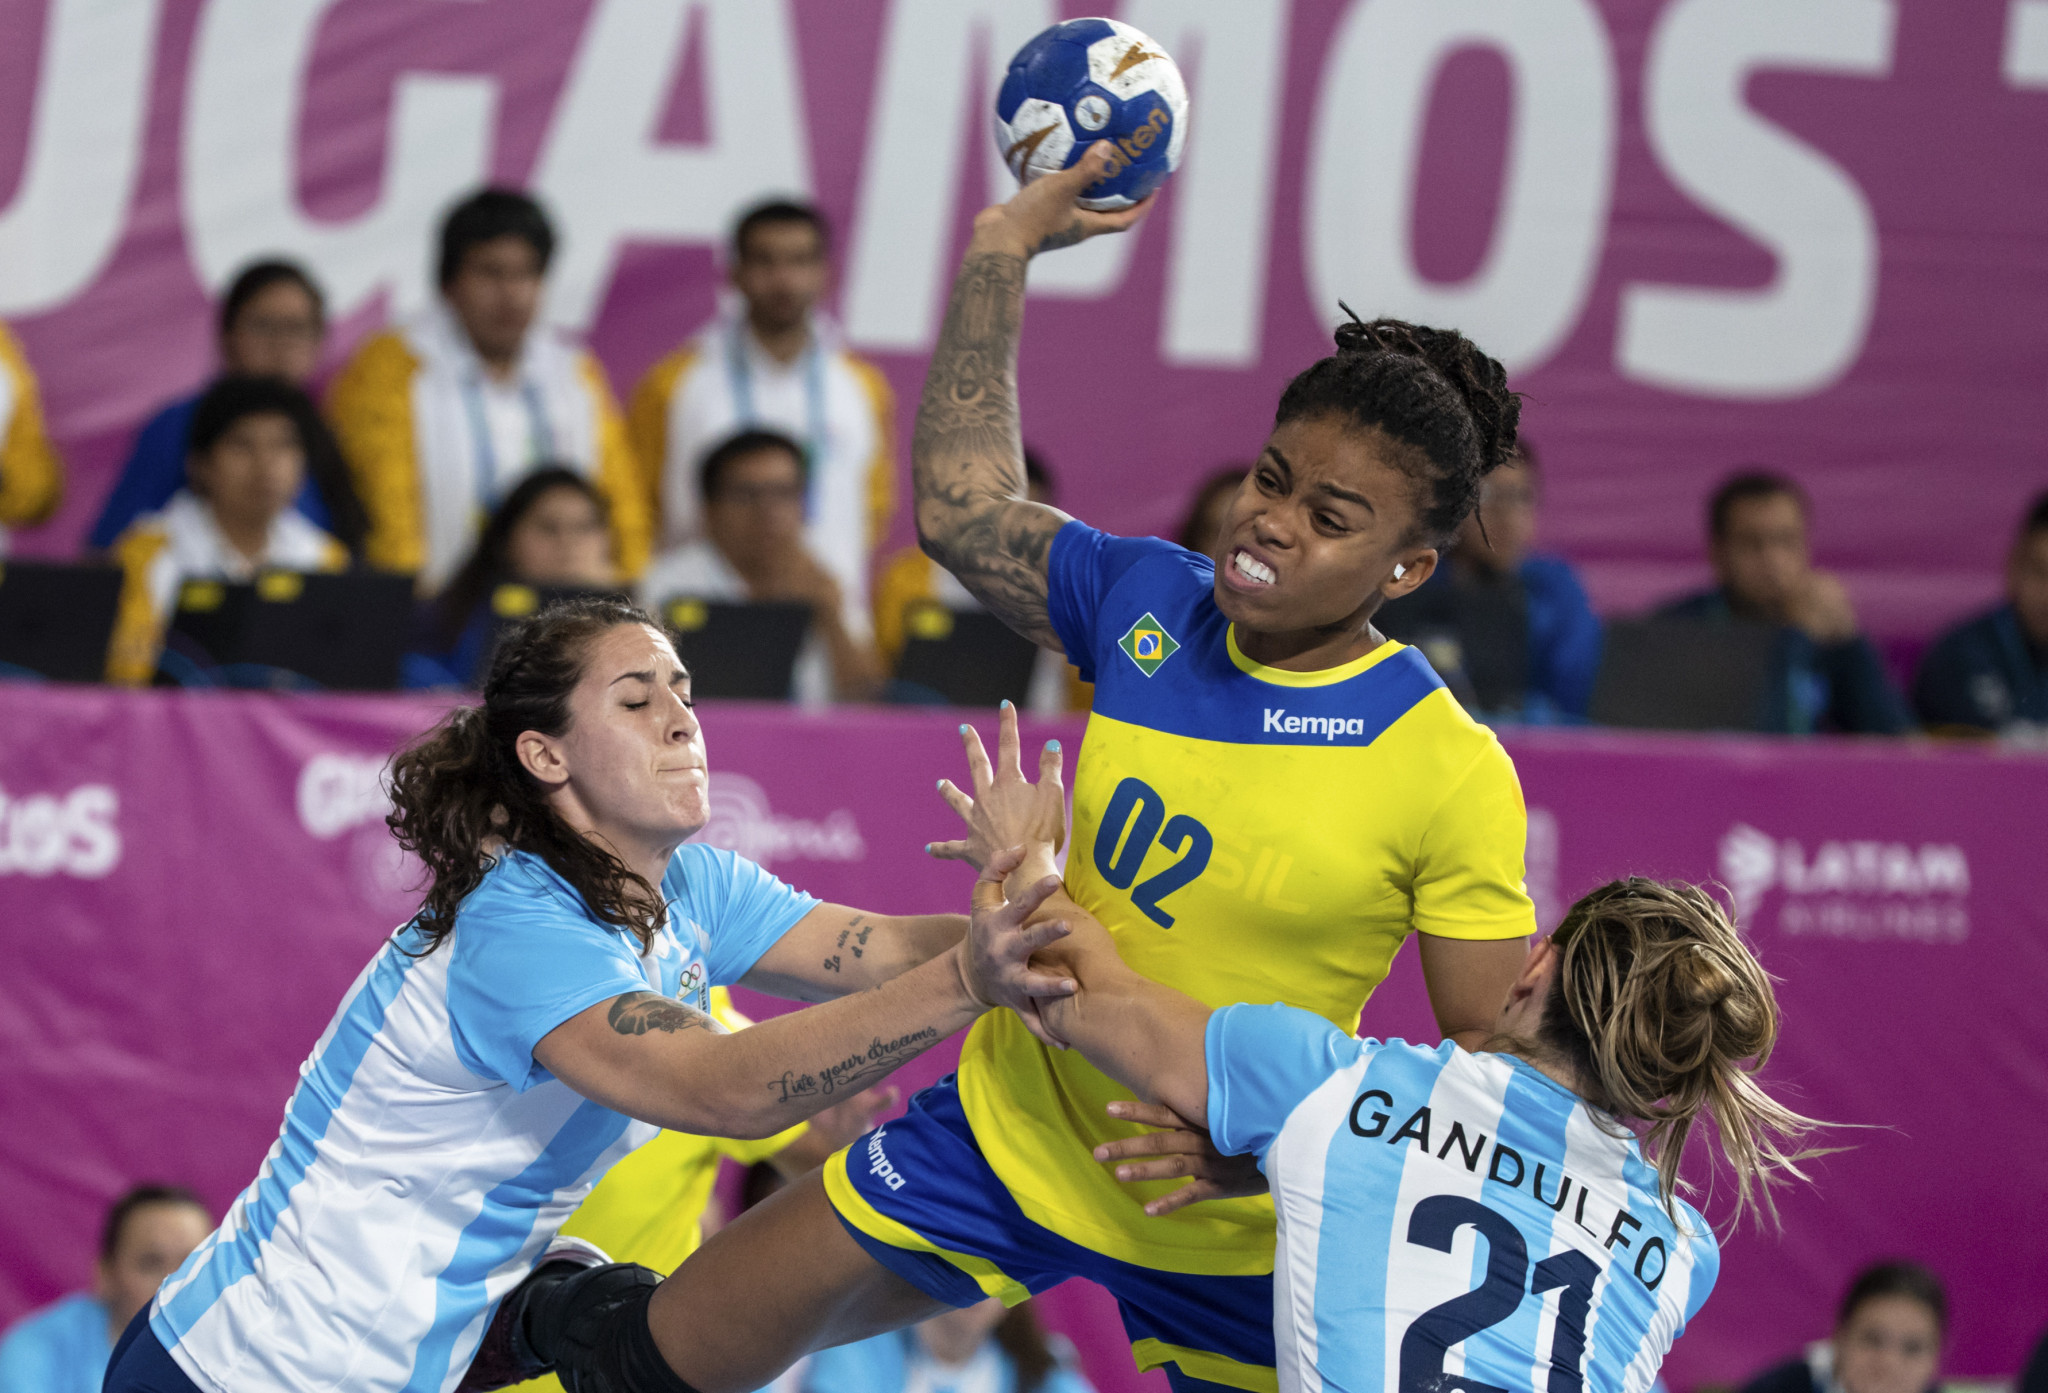 Brazil qualified for Tokyo 2020 with women's handball victory at Lima 2019 ©Lima 2019